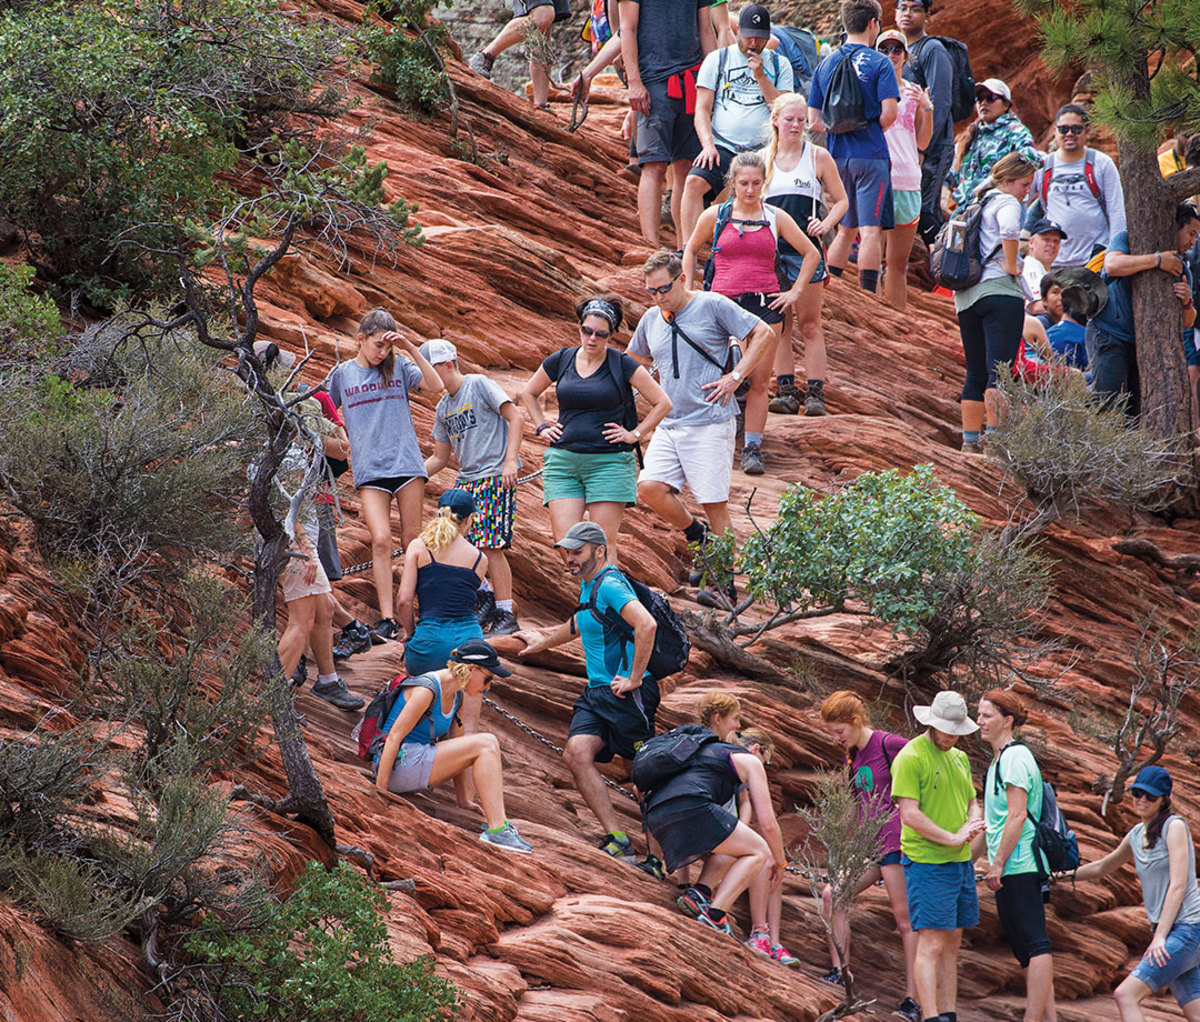 The crowds at Zion: They're not fun to deal with, but it's a clear sign of increased support for national parks.